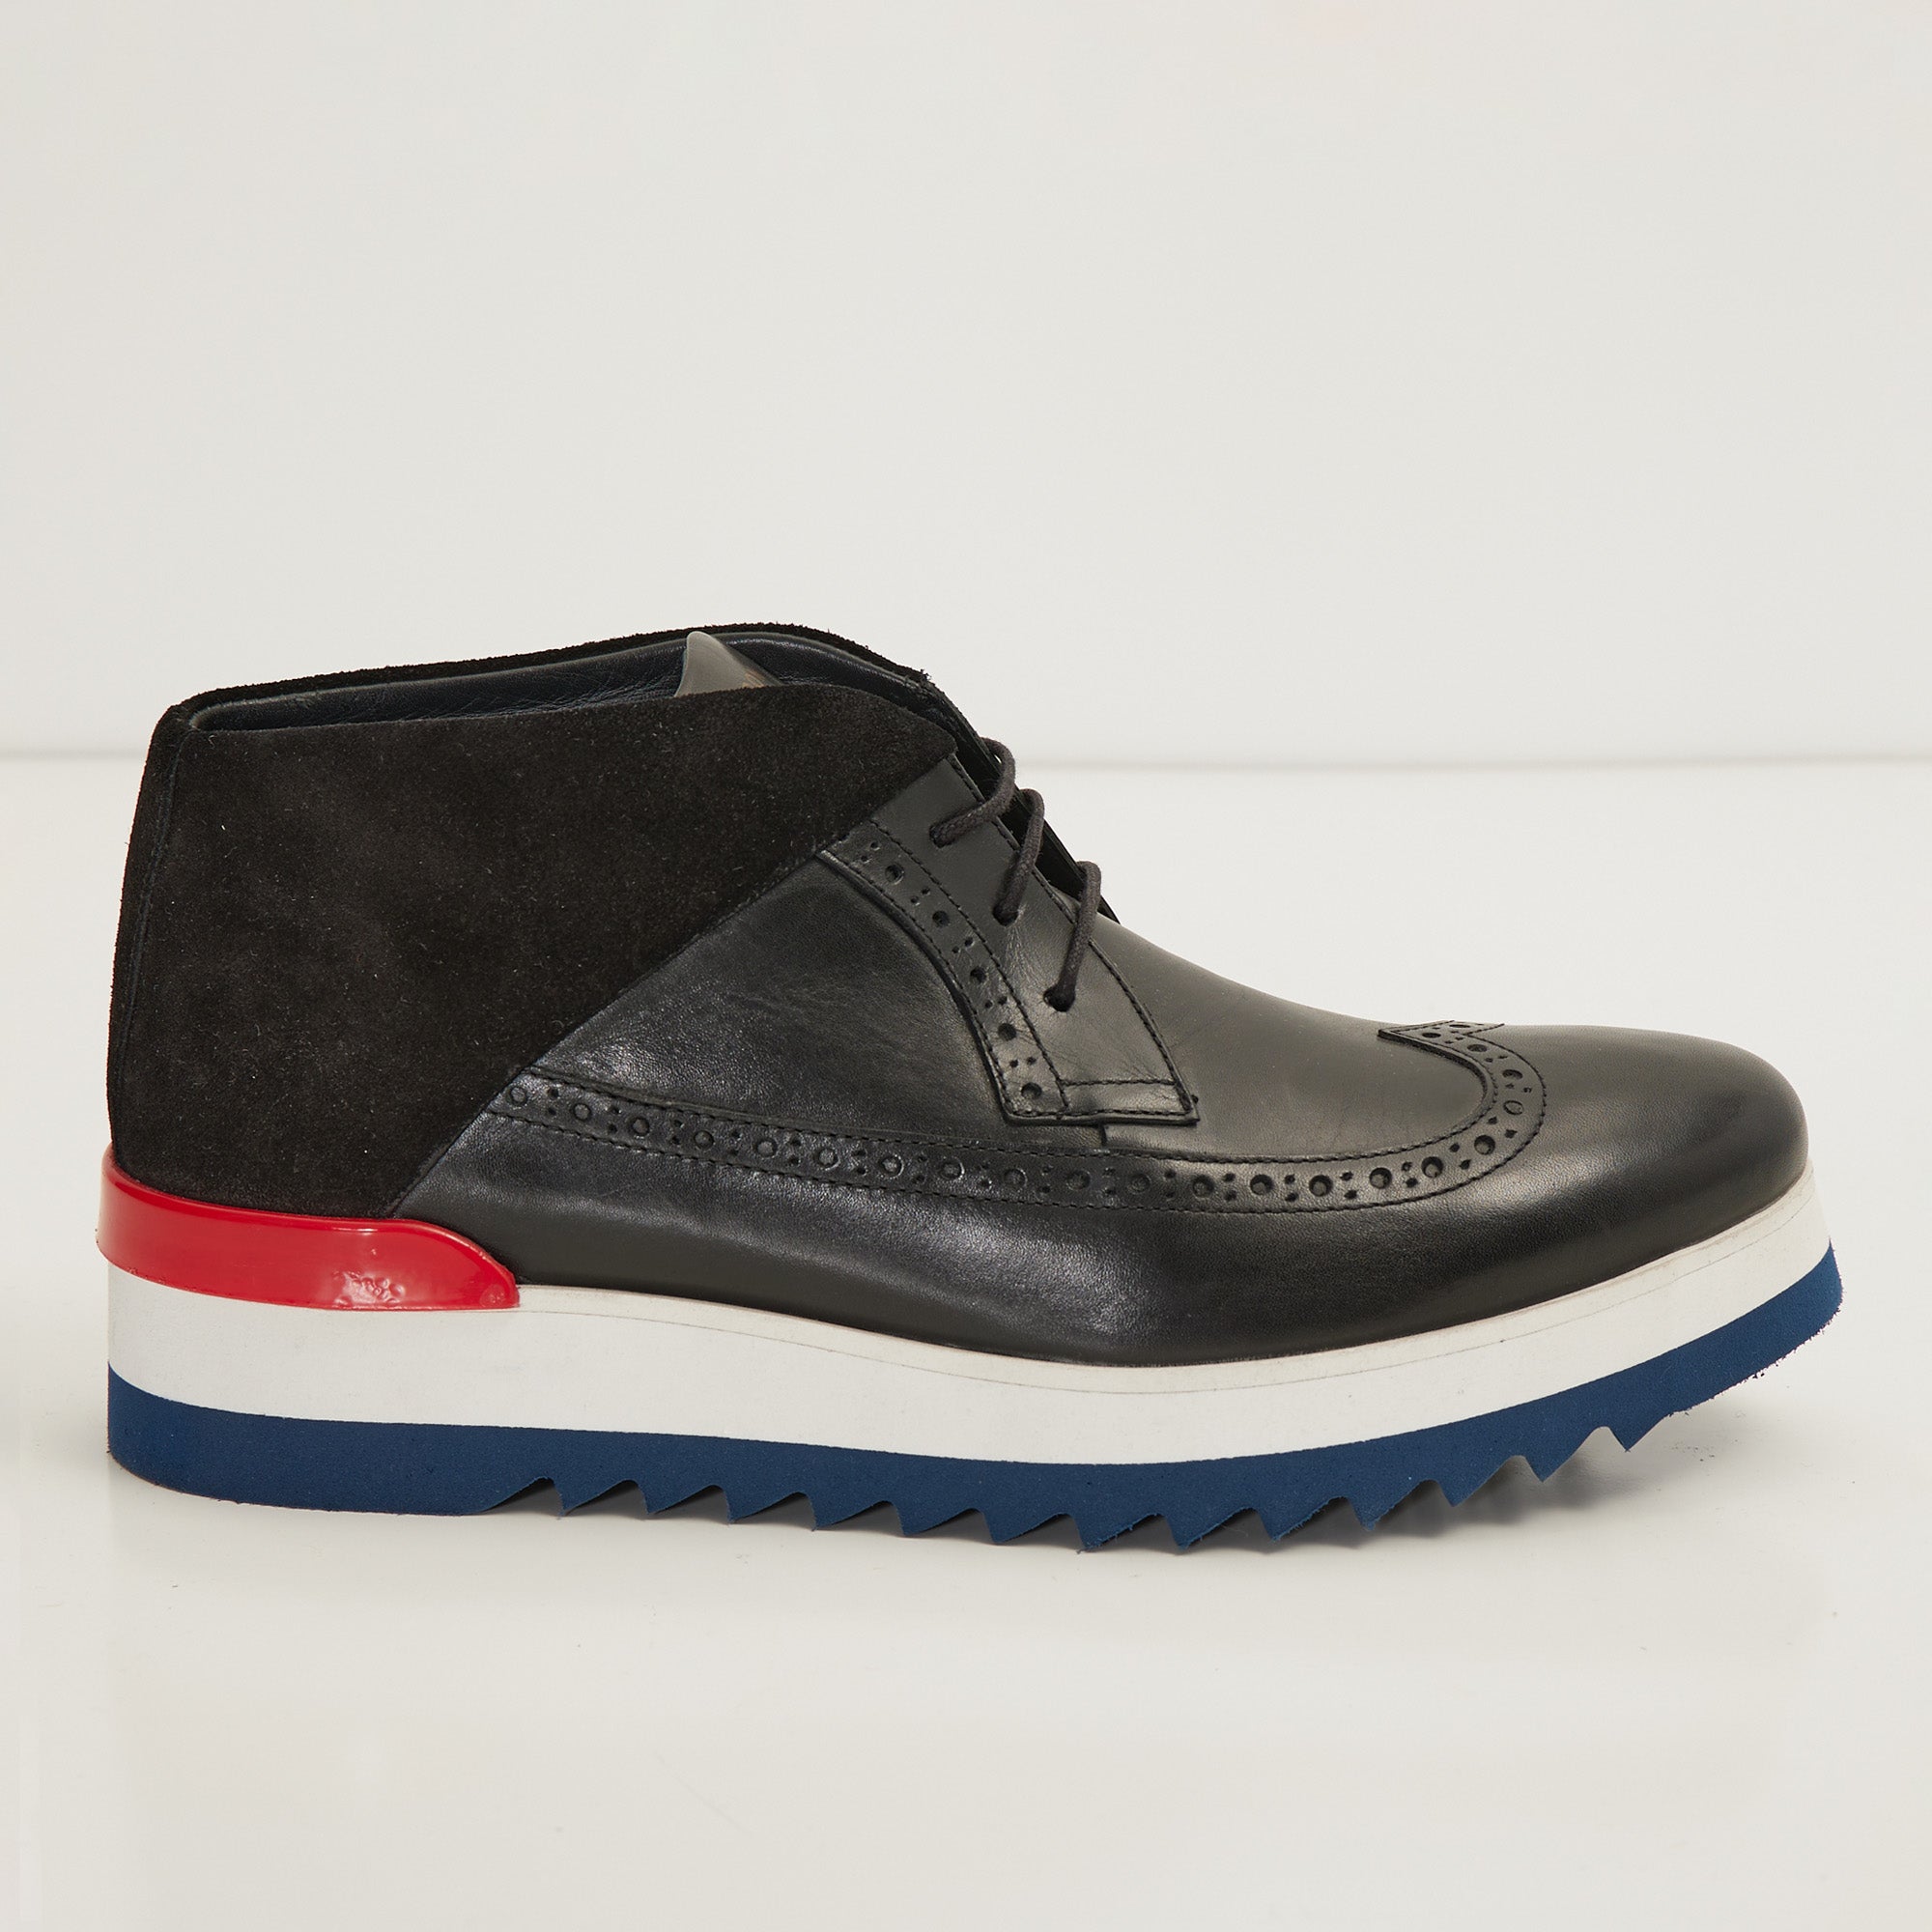 N° C3836 RT LEATHER WINGTIP SNEAKER BOOTS - BLACK WHITE